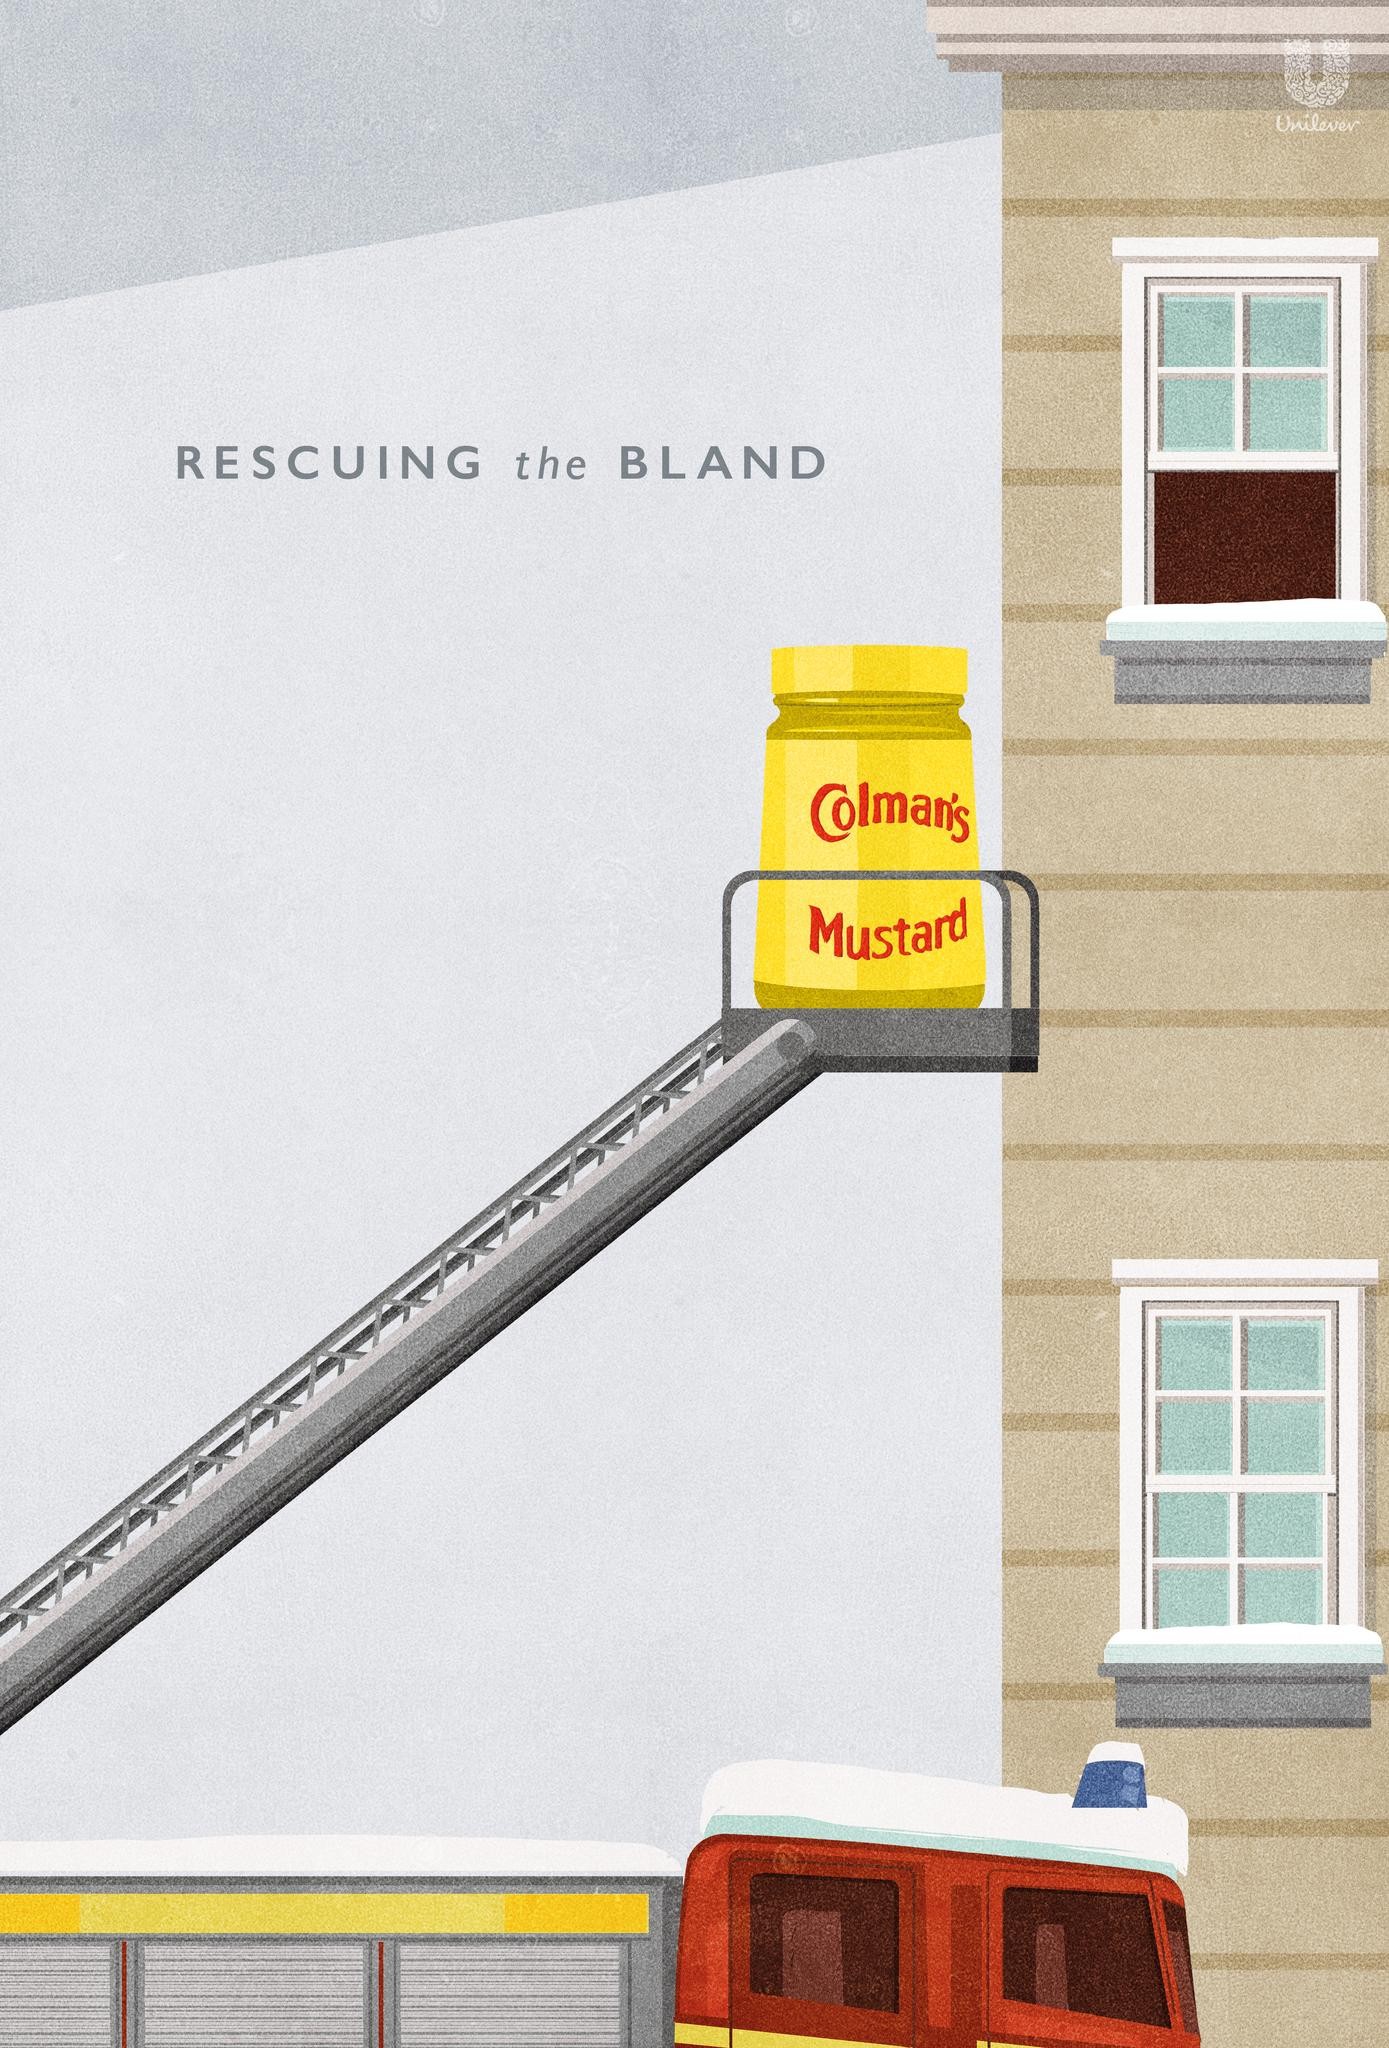 Rescuing the Bland